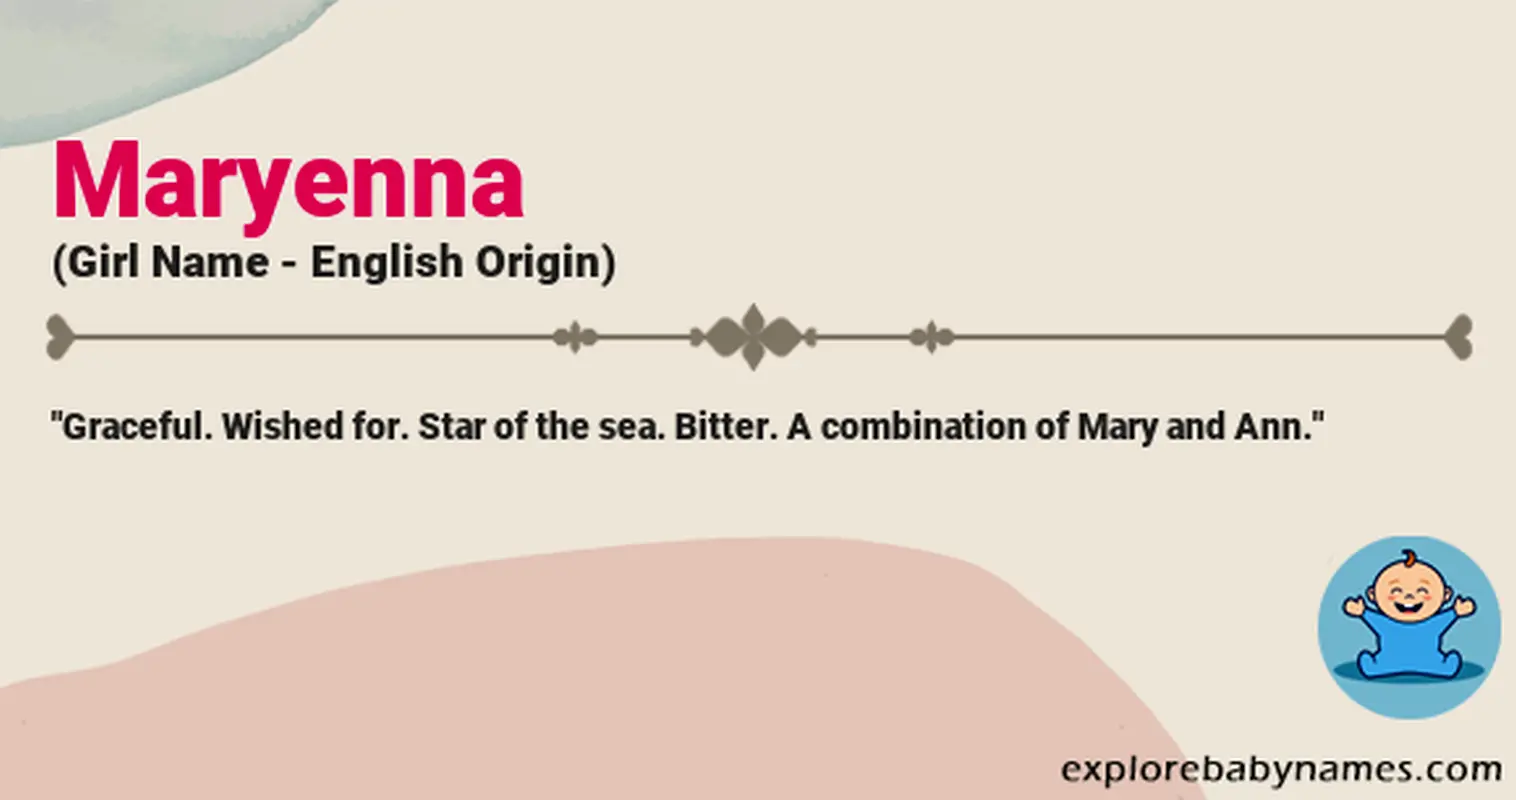 Meaning of Maryenna